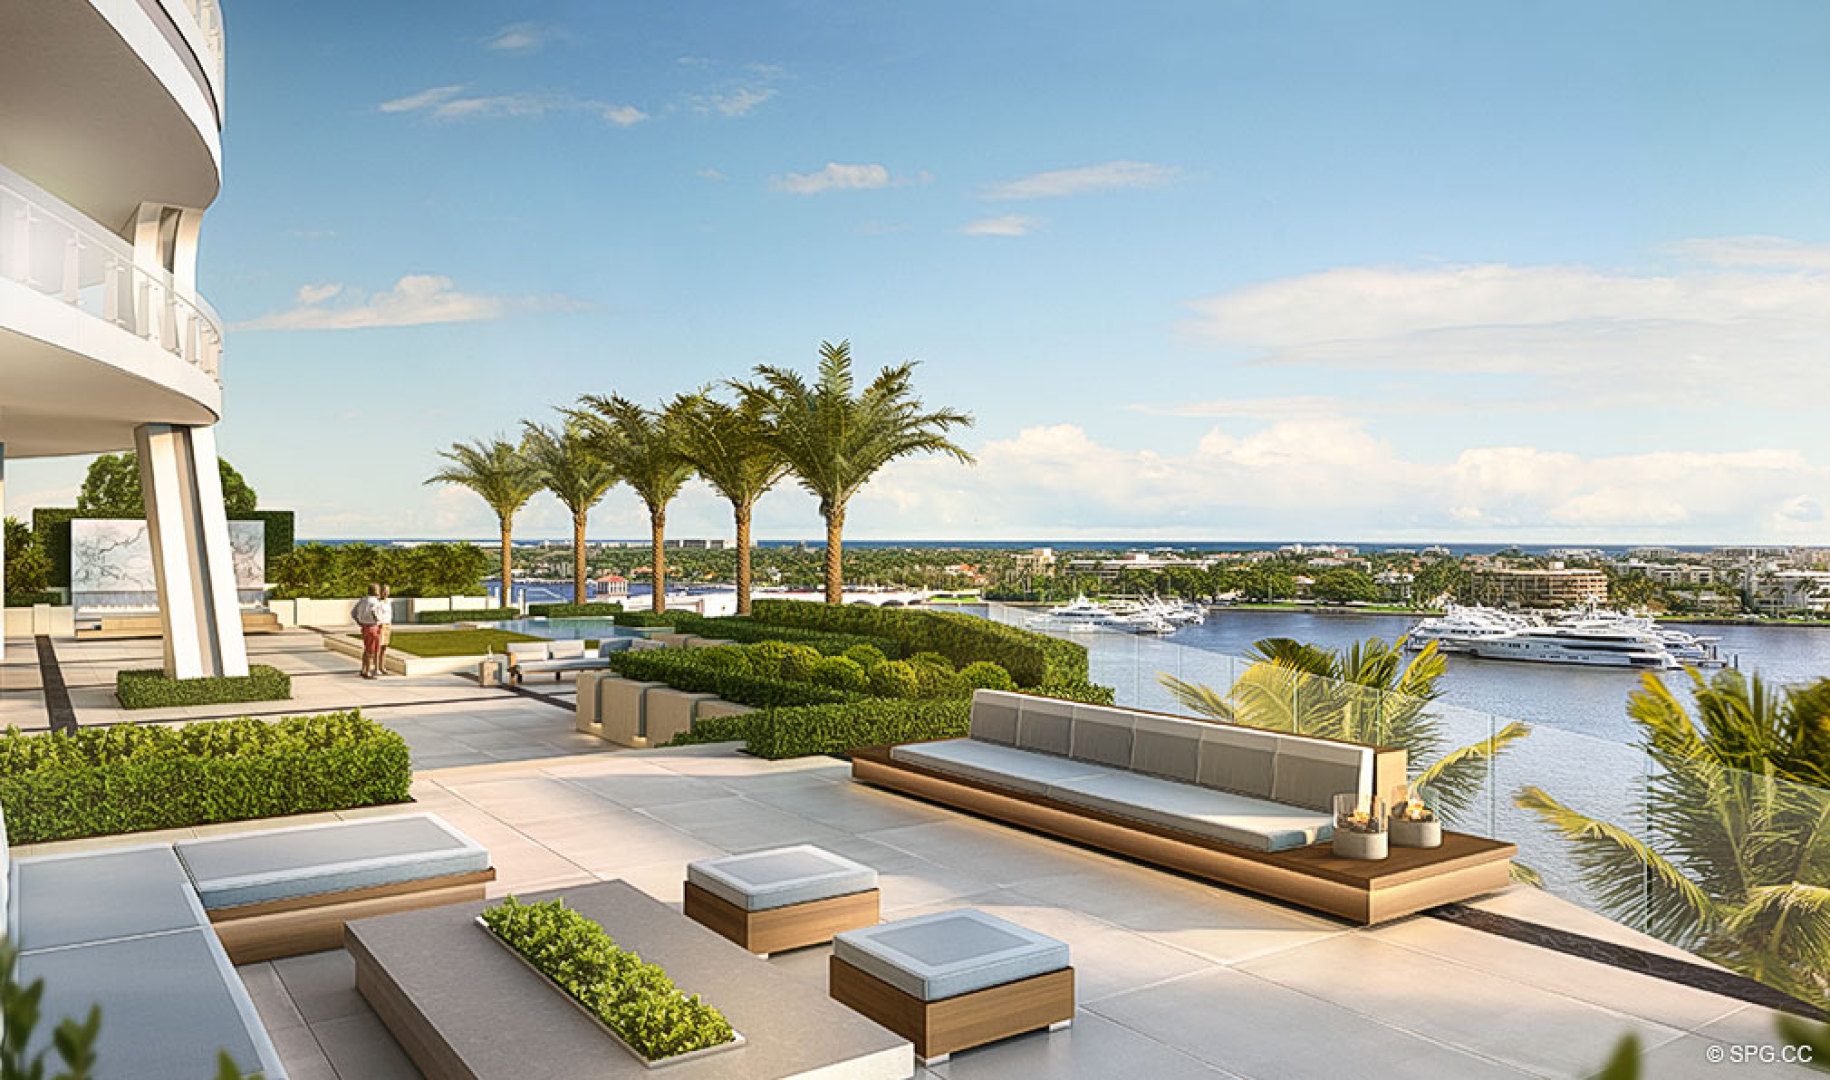 Amenity Terrace View from The Bristol, Luxury Waterfront Condos in West Palm Beach, Florida 33401